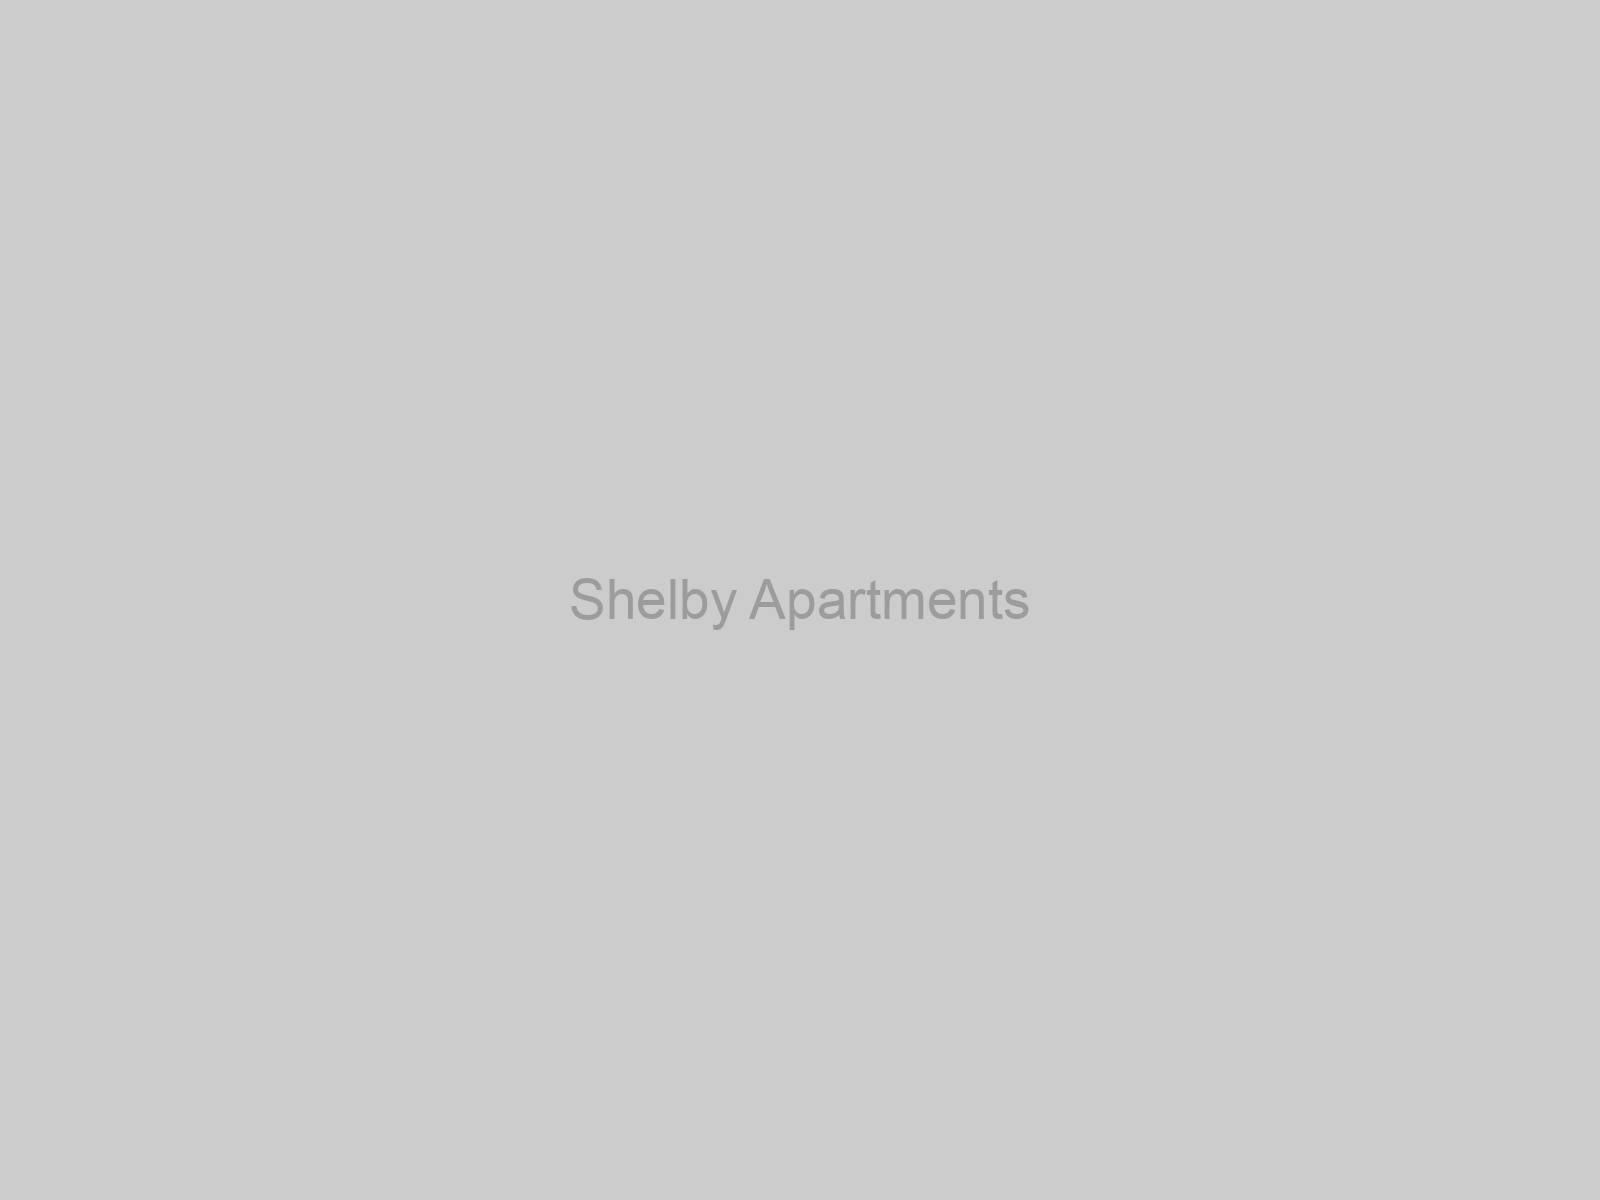 Shelby Apartments